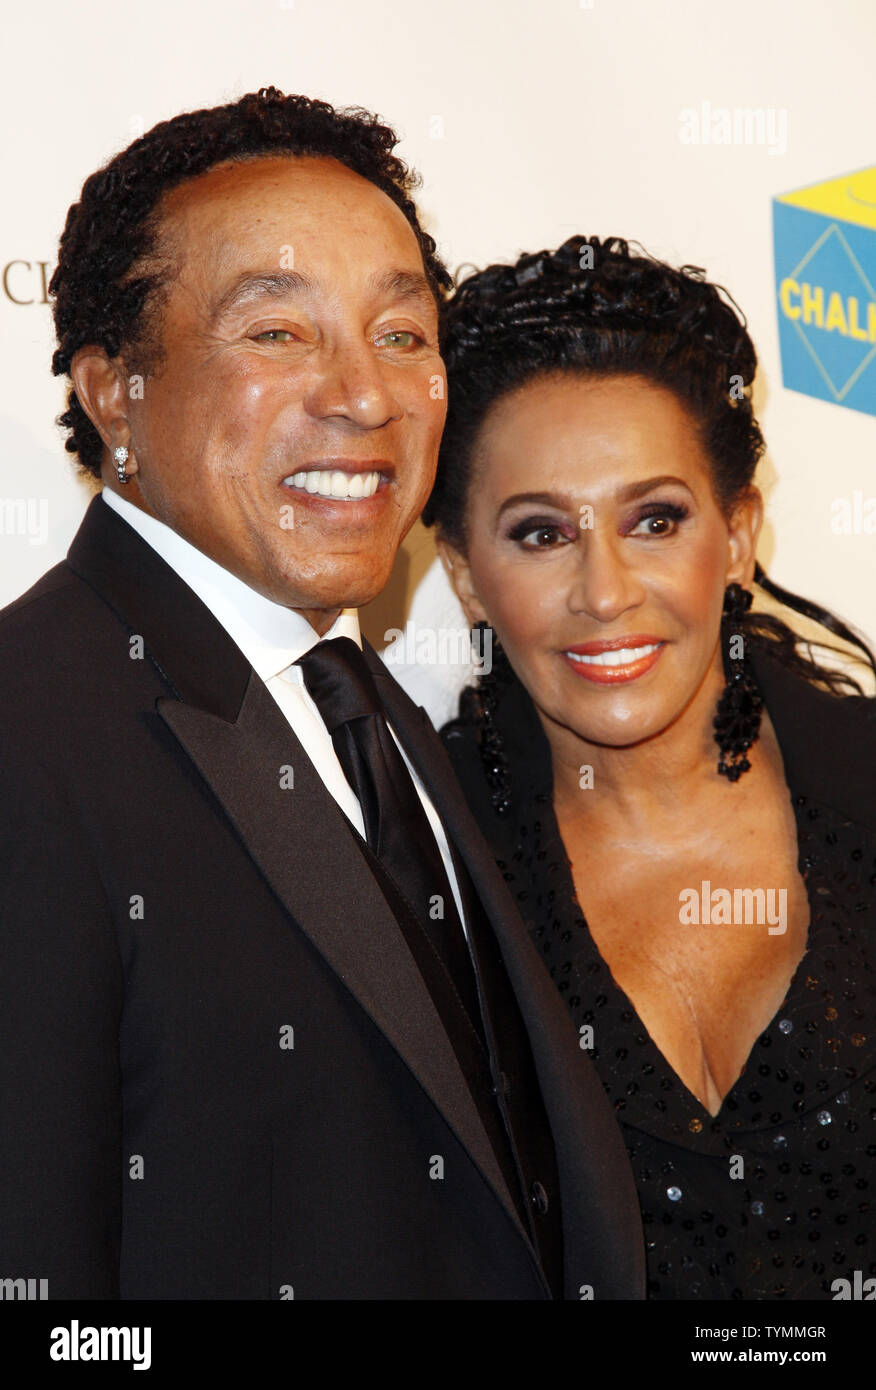 Smokey Robinson and Claudette Robinson arrive at ' An Enduring Vision'  Elton John Aids Foundation Benefit at Cipriani in New York City on October 26, 2011.       UPI/John Angelillo Stock Photo